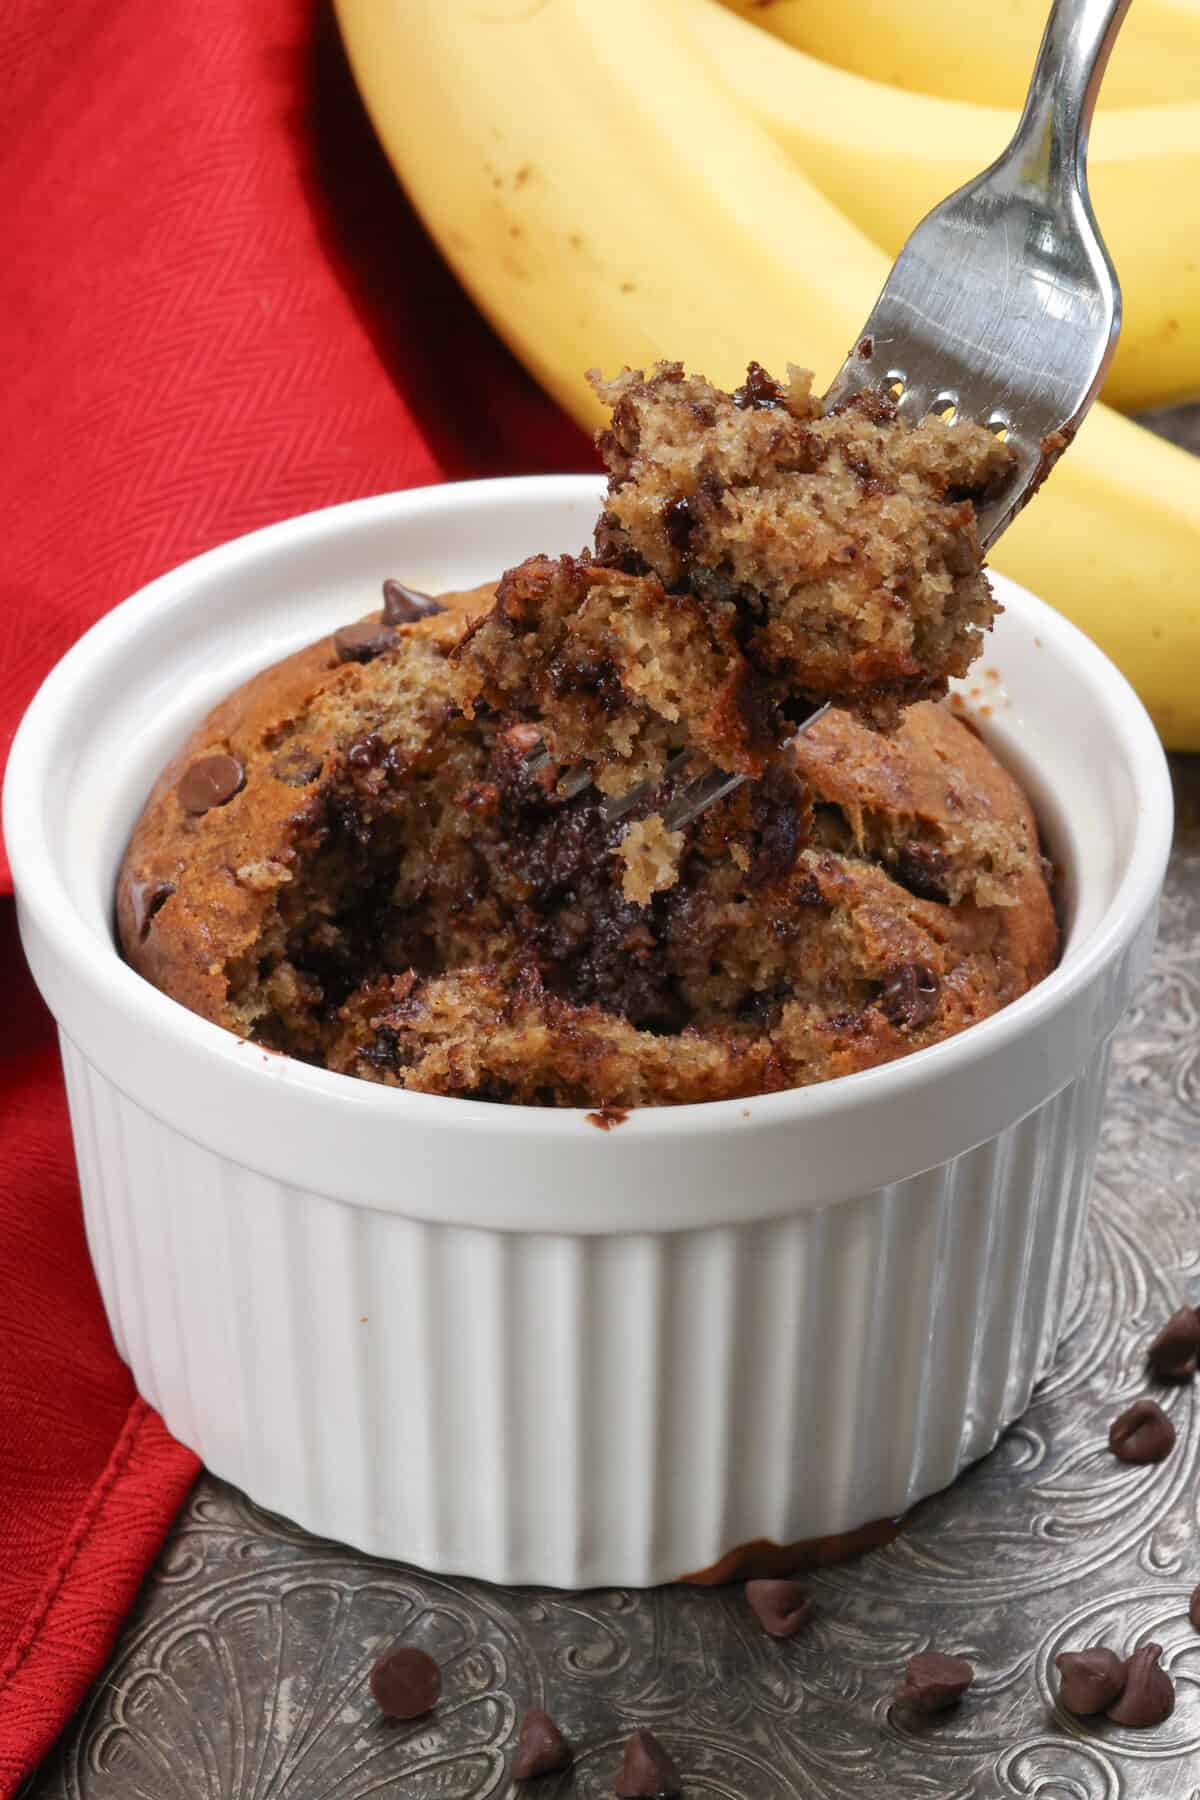 a fork filled with chocolate chip banana bread over the ramekin with the remaining banana bread.